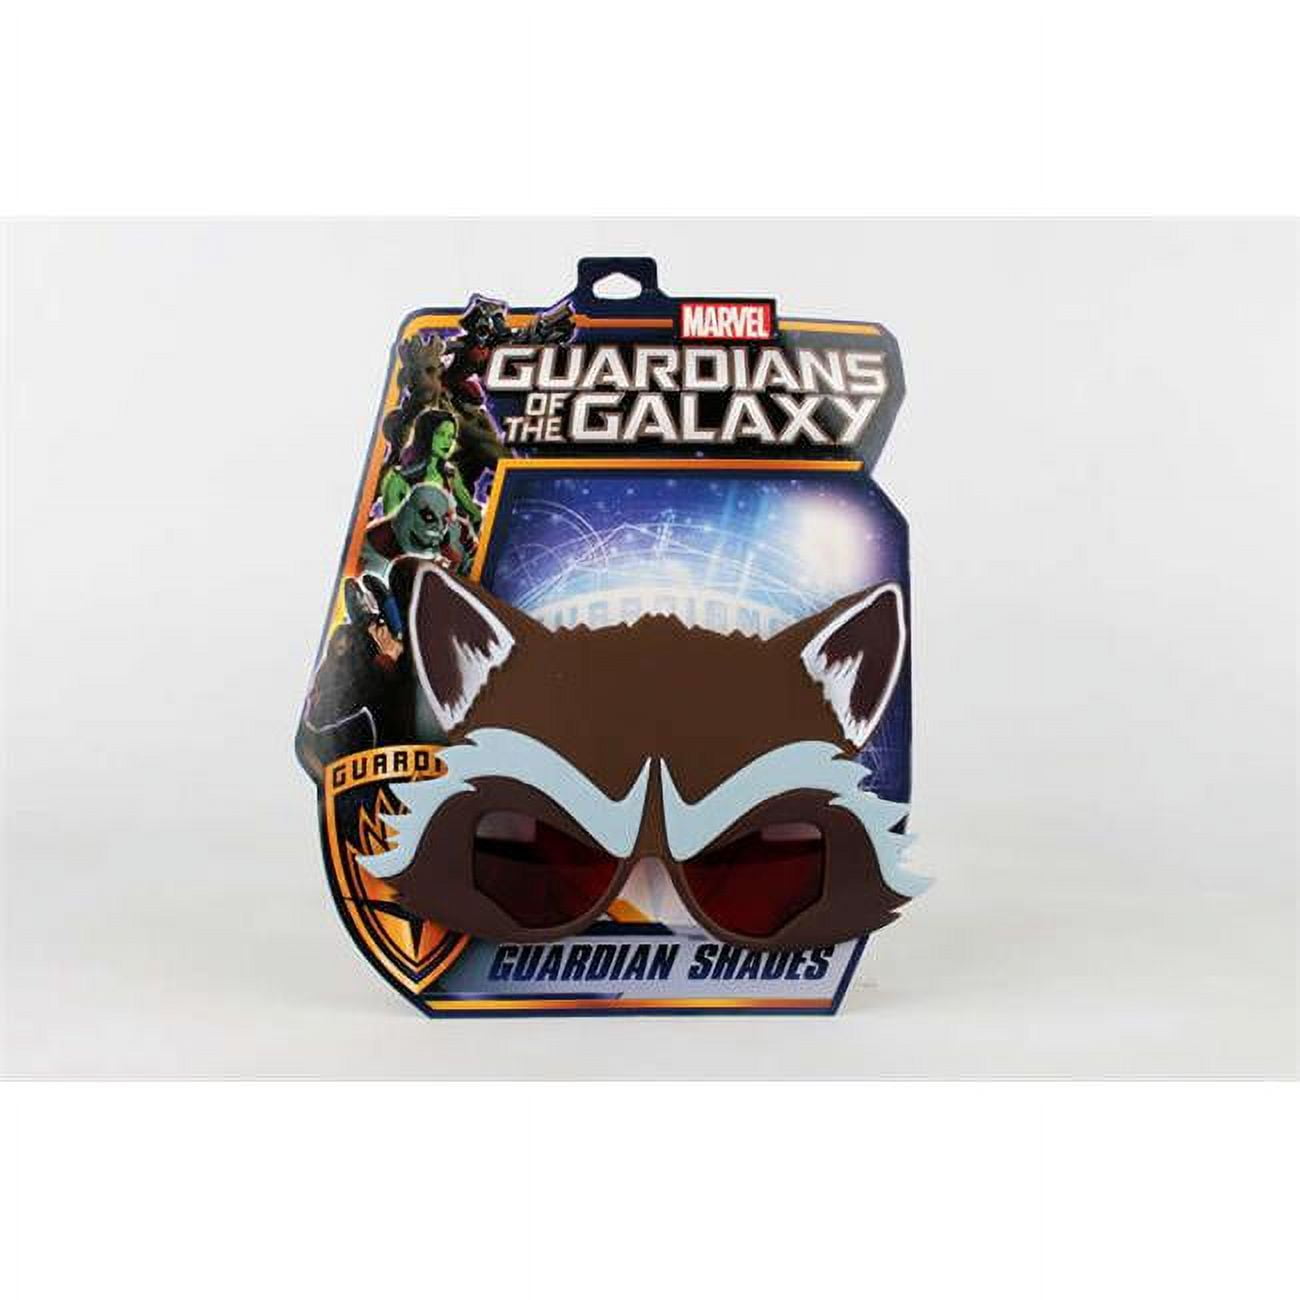 Sunstaches Sg2412 Rocket & Guardians Of The Galaxy Novelty Sunglasses